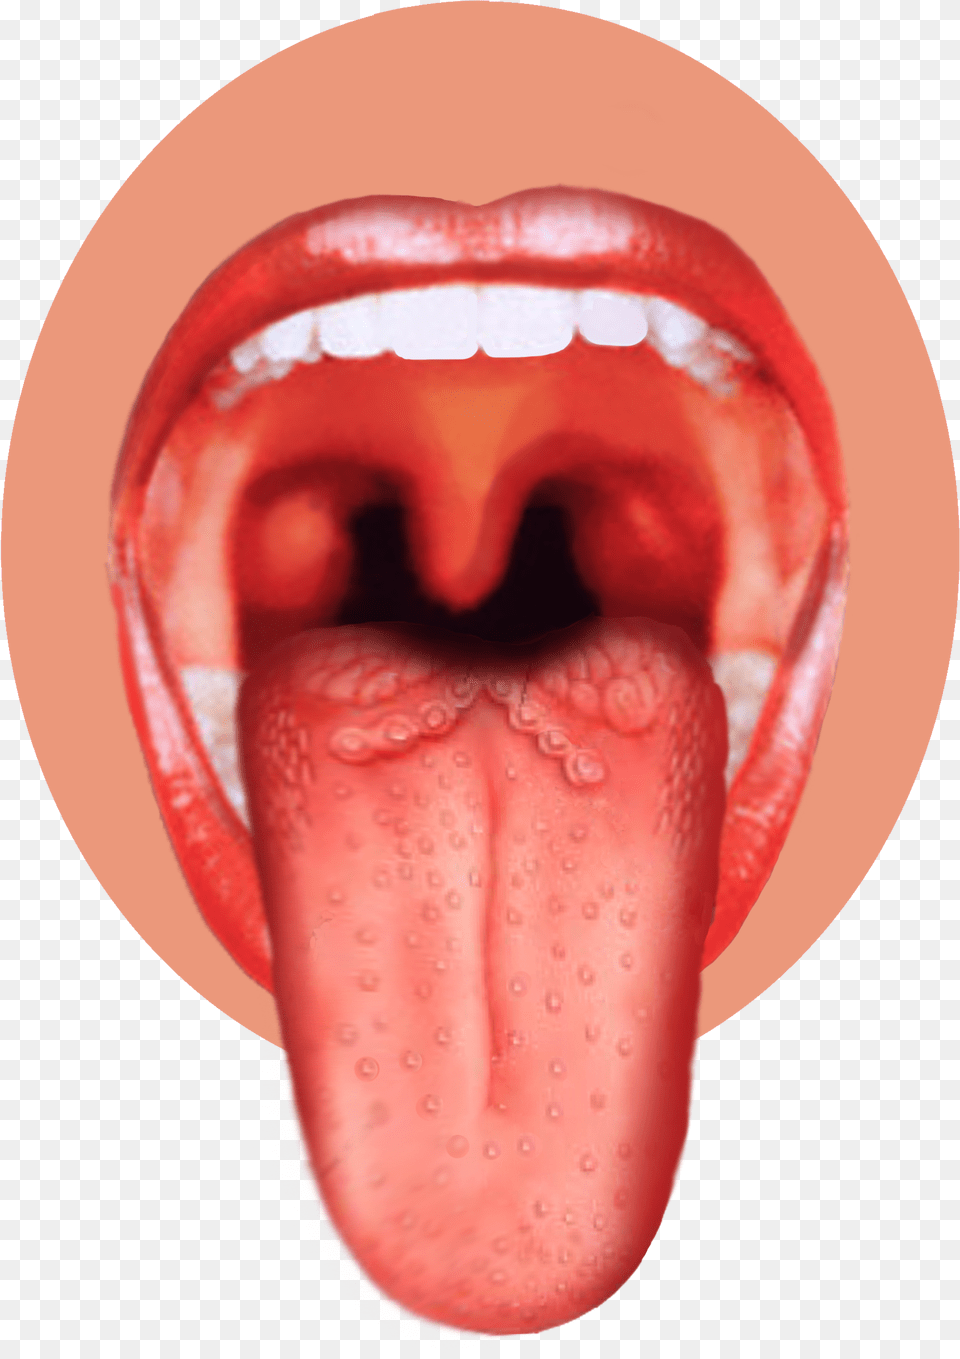 Human Tongue Taste Buds On Tongue, Body Part, Mouth, Person, Food Png Image